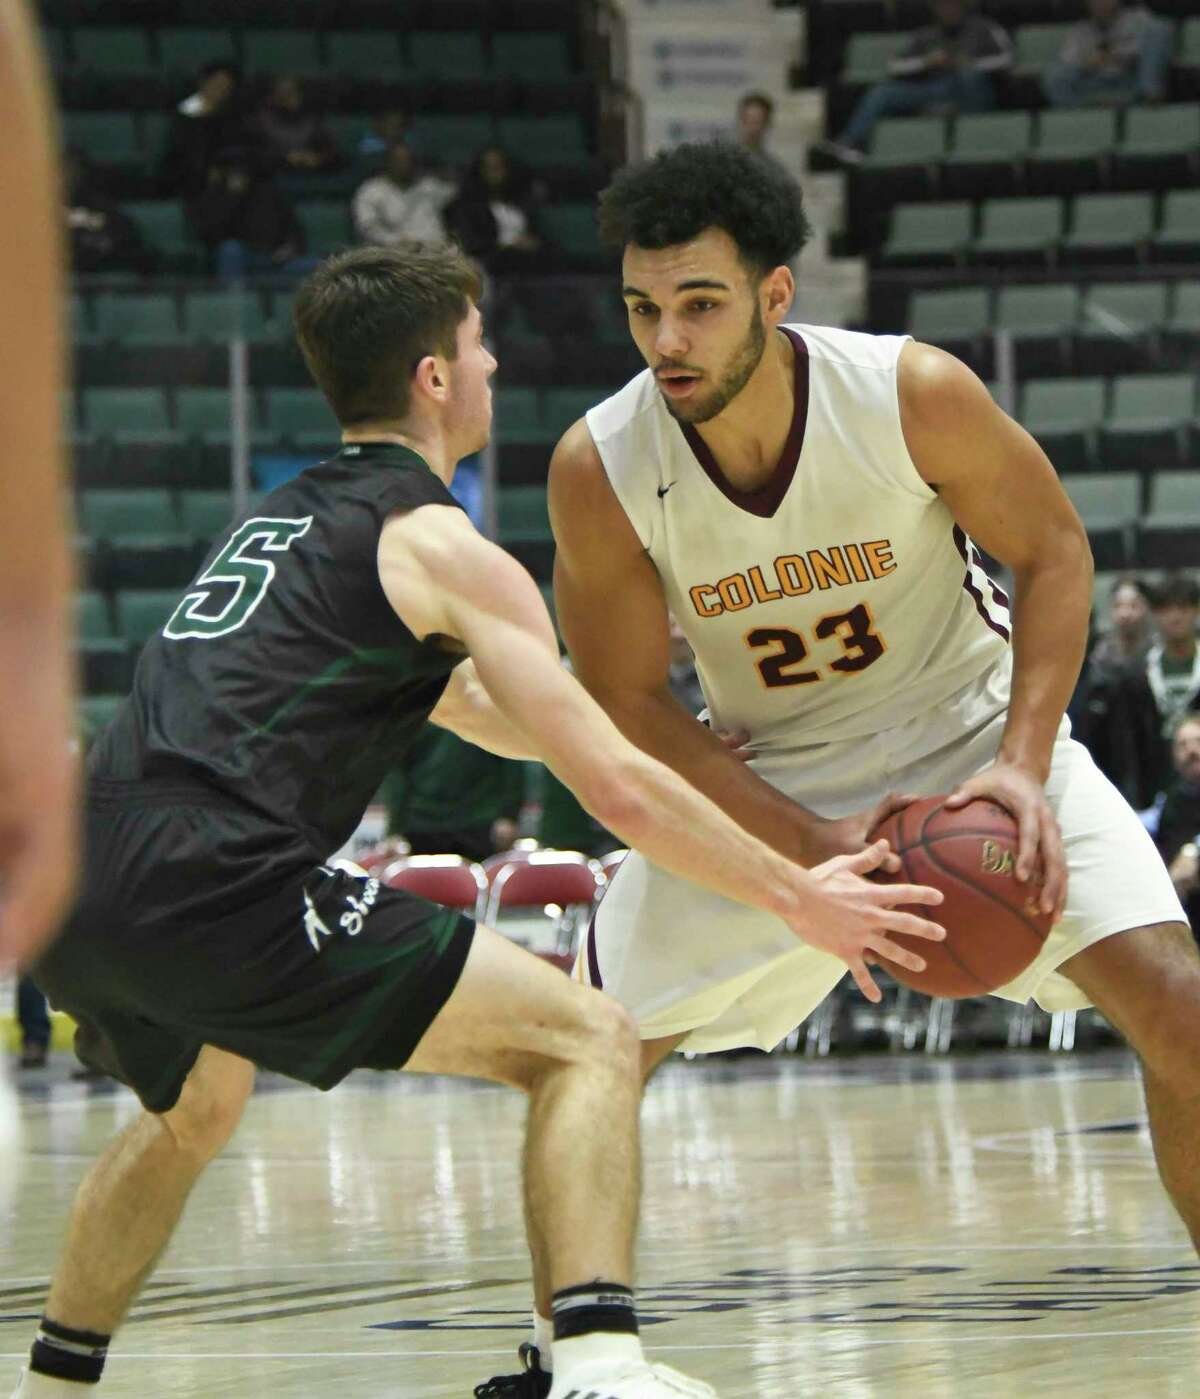 Colonie's Isaiah Moll looks for an opening past Shen's Christopher Hulbert during the Class AA Section II title game on Saturday, Mar. 3, 2018, at Cool Insuring Arena in Glens Falls, N.Y. Colonie fell to Shen 43-40 for the Class AA title. (Jenn March, Special to the Times Union)